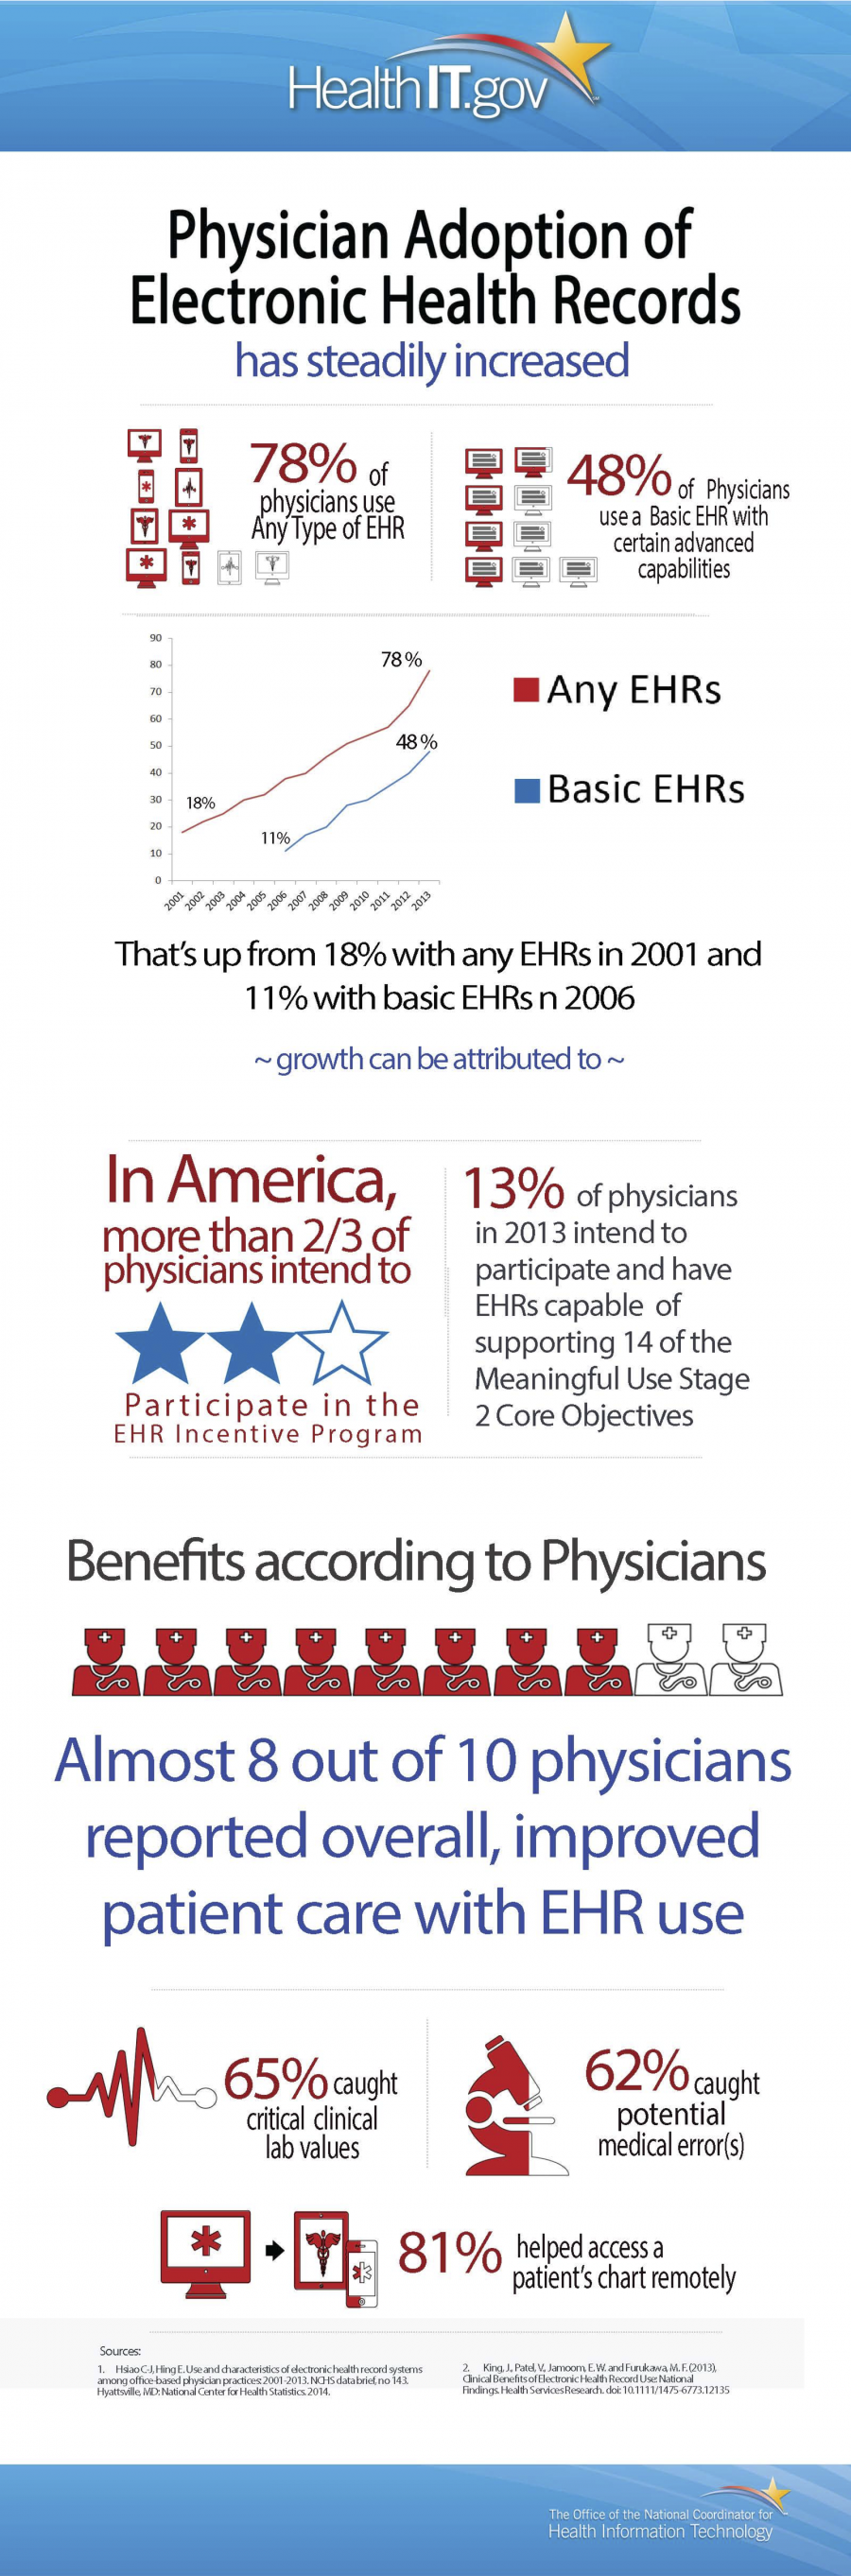 Physician Adoption of EHRs